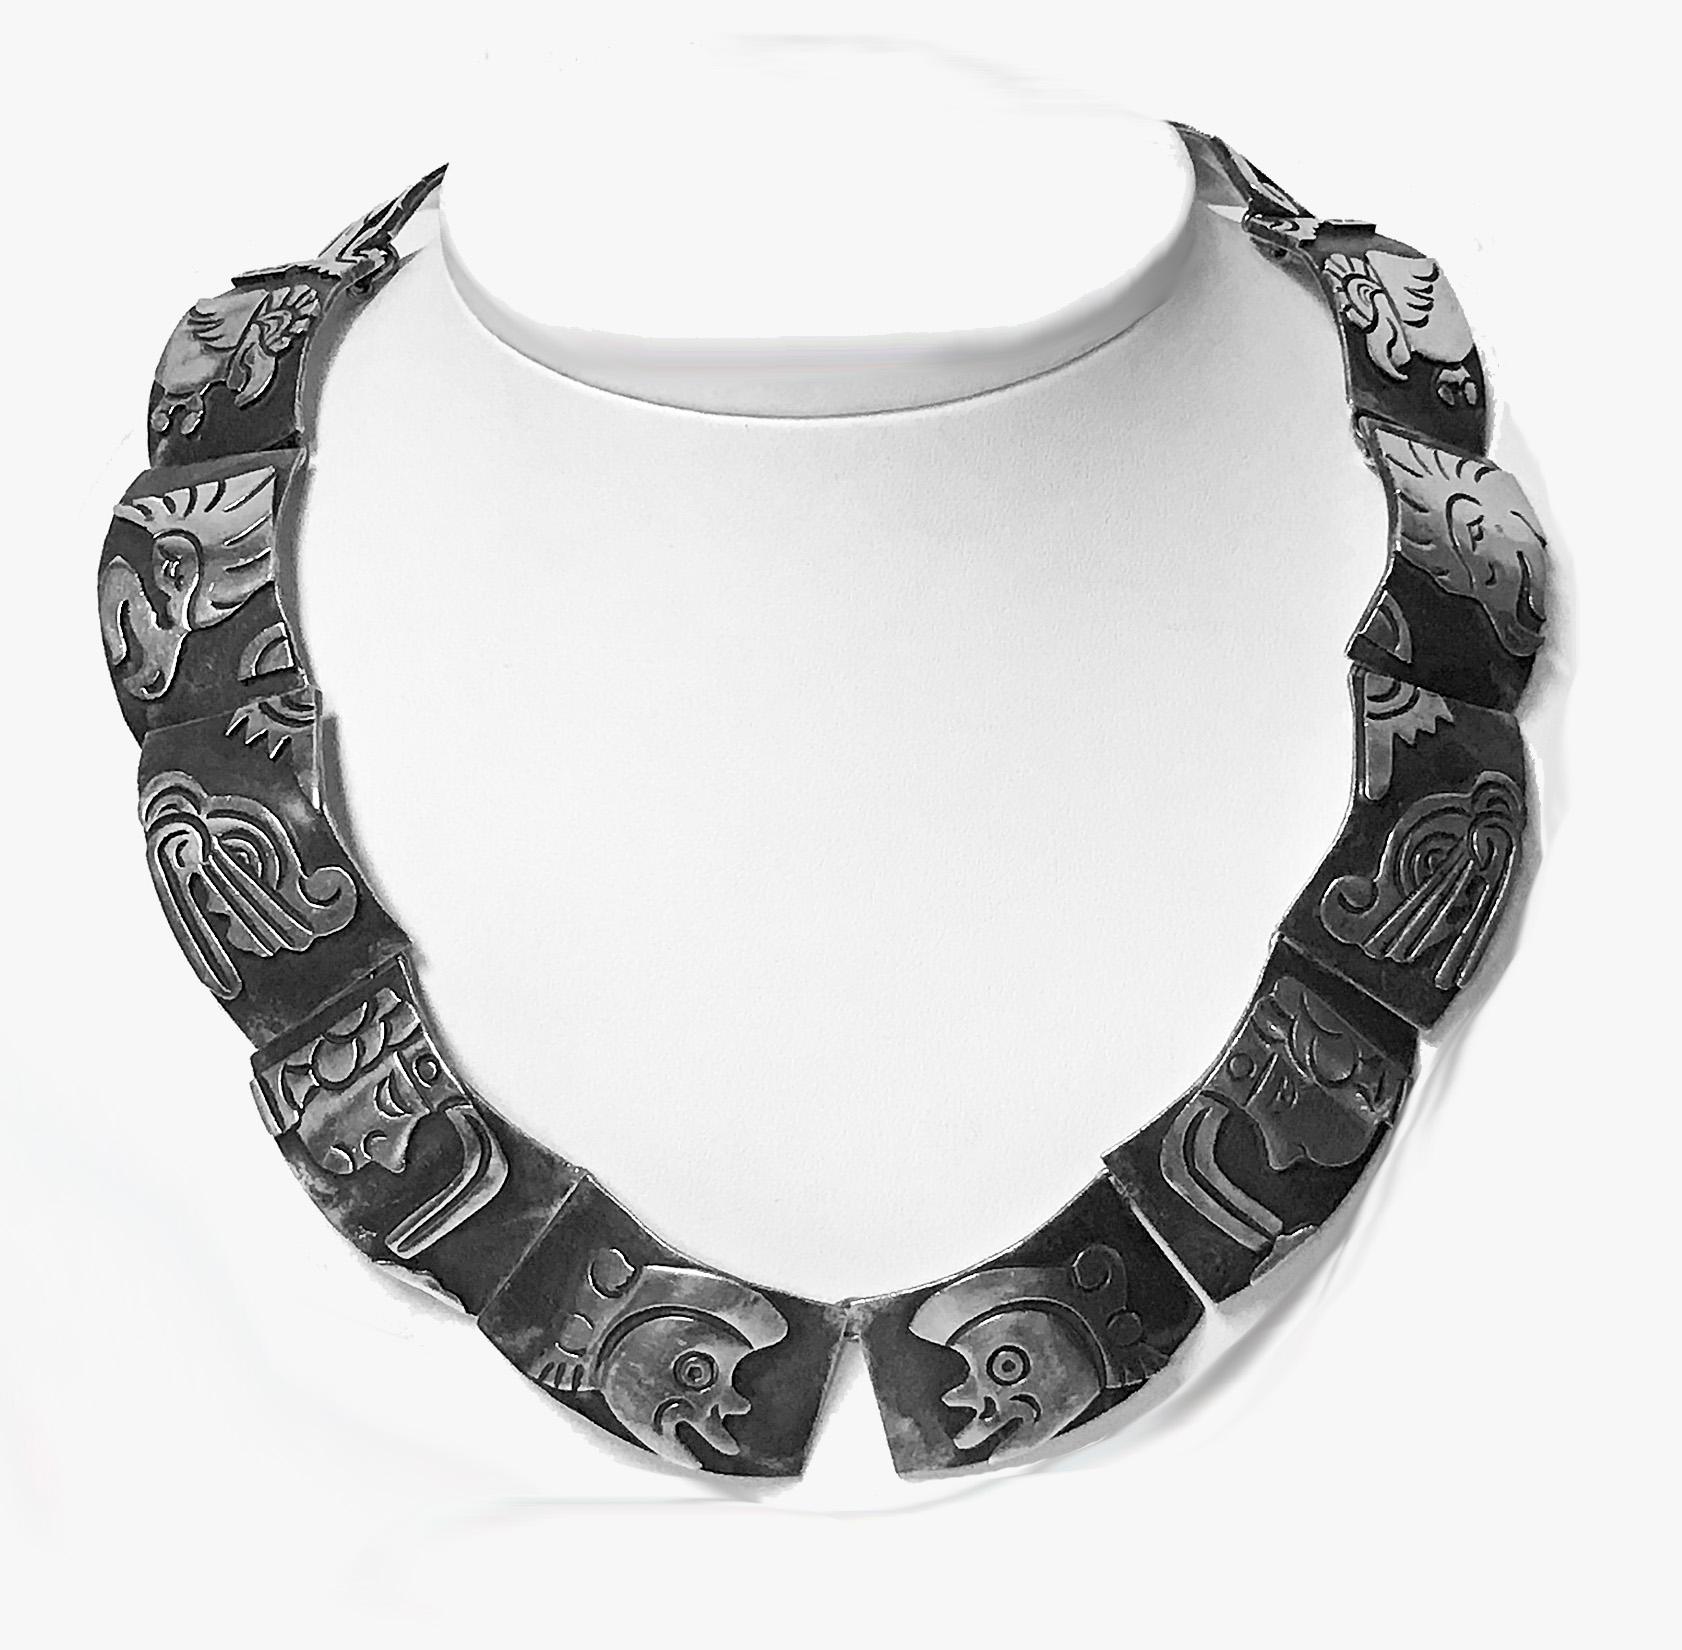 Gerardo Lopez Mexican 1950’s Sterling Silver Aztec Deity Necklace. The Necklace depicting Aztec Mythological Gods in polished silver applied to oxidized silver backgrounds. Signed Lopez Taxco, also marked Sterling 925 Hecho en Mexico and with eagle